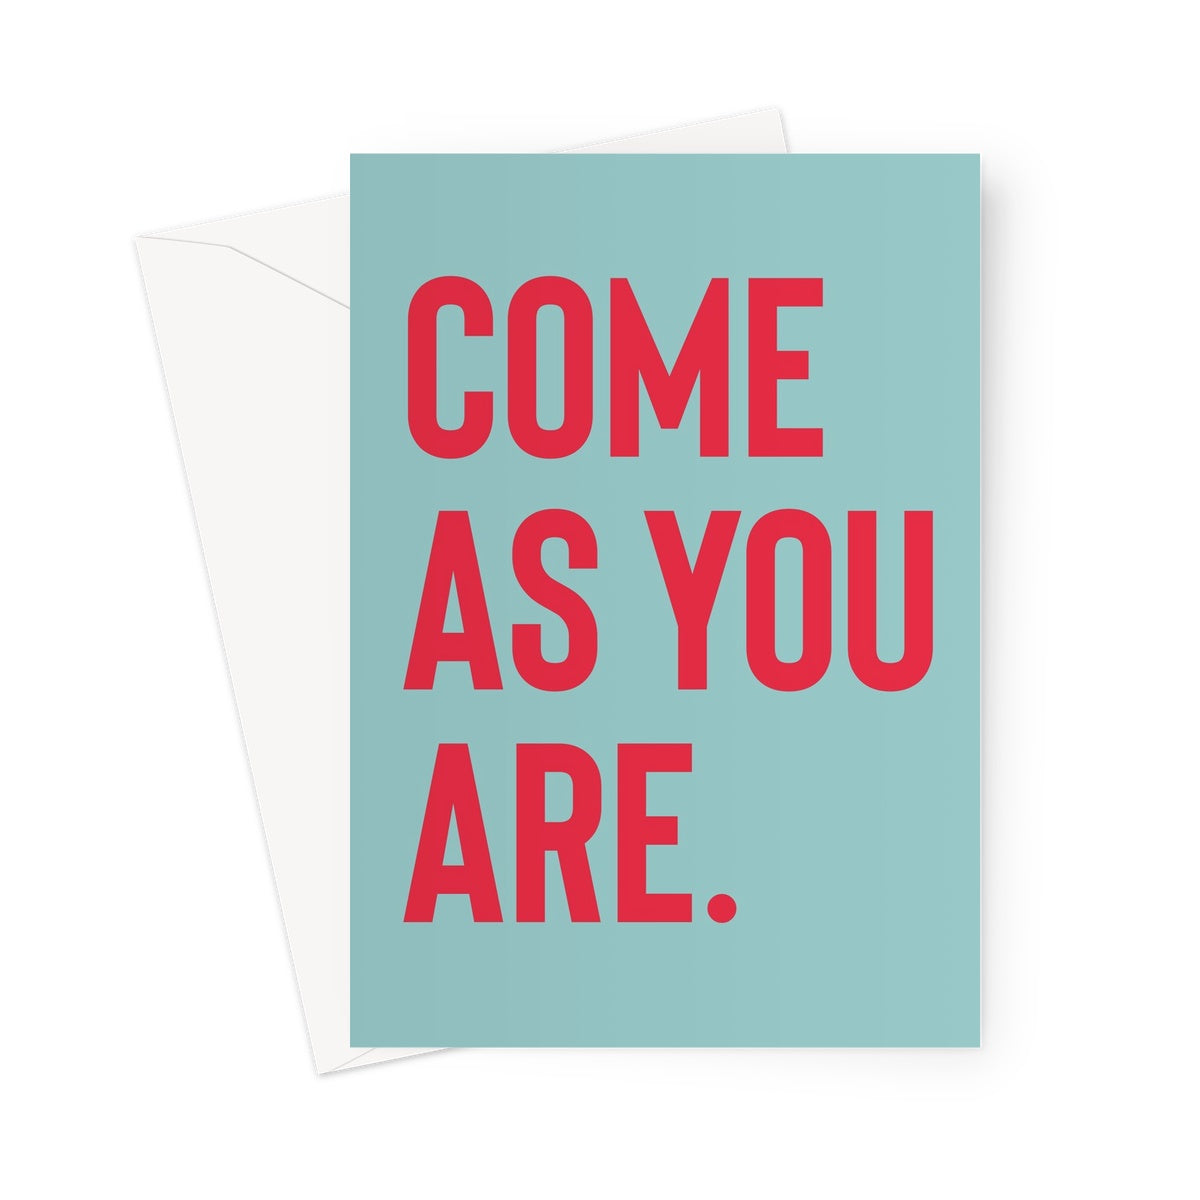 COME AS YOU ARE - Blue/Red Greeting Card